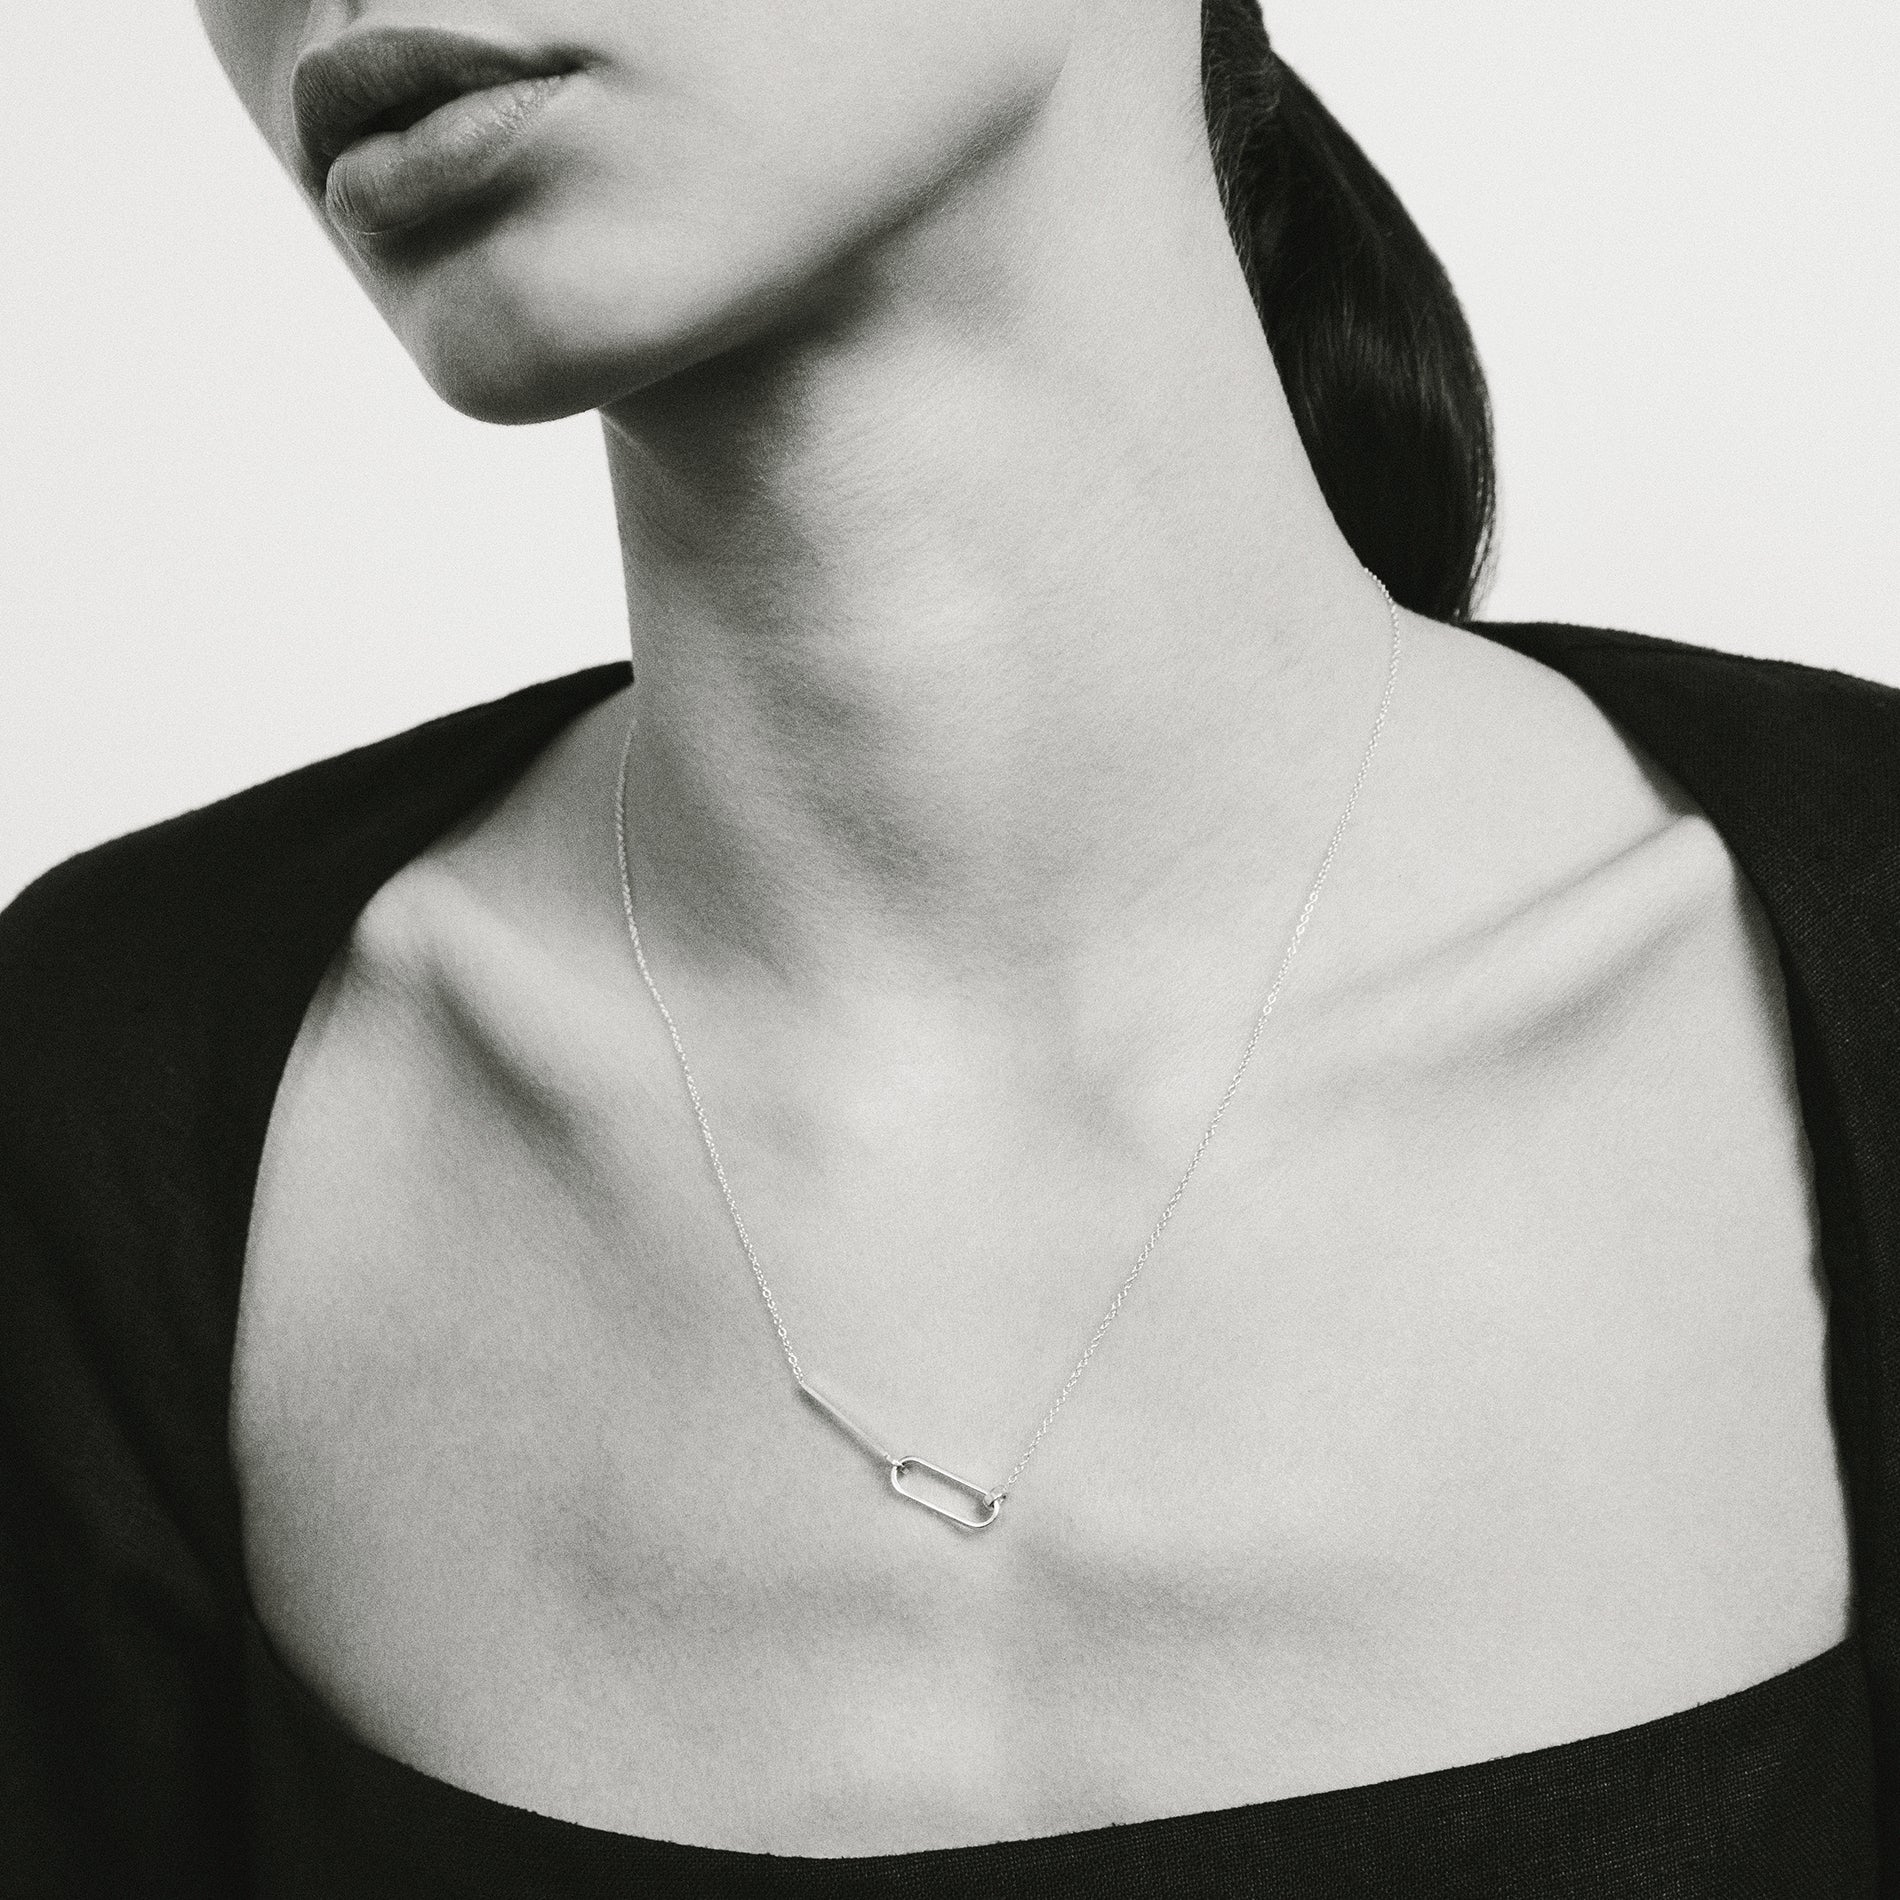 Visi unisex Necklace in Sterling Silver By SHW Fine Jewelry NYC